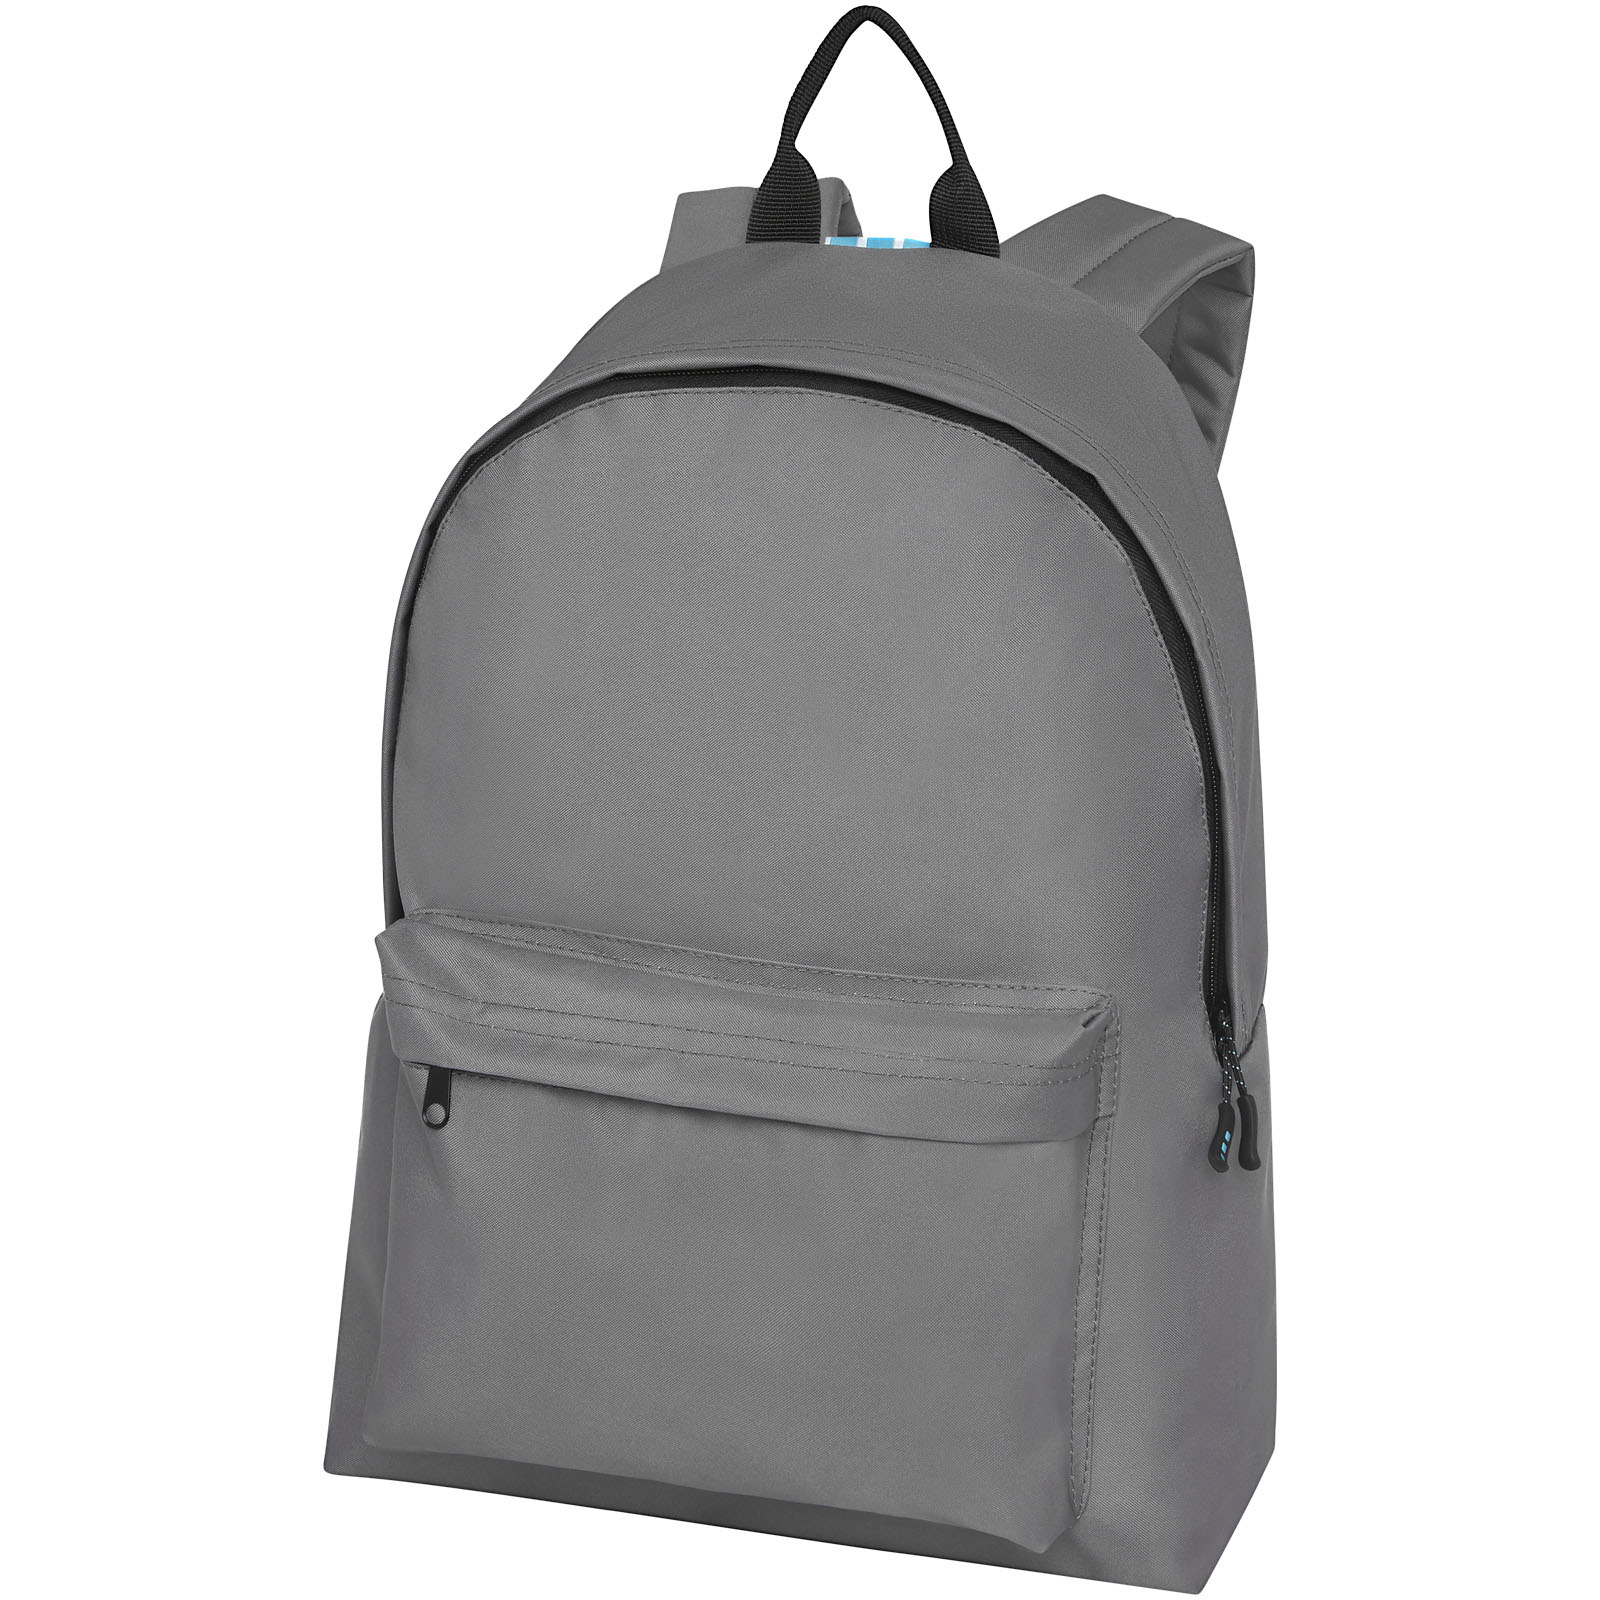 Polyester backpack NODE in recycled material